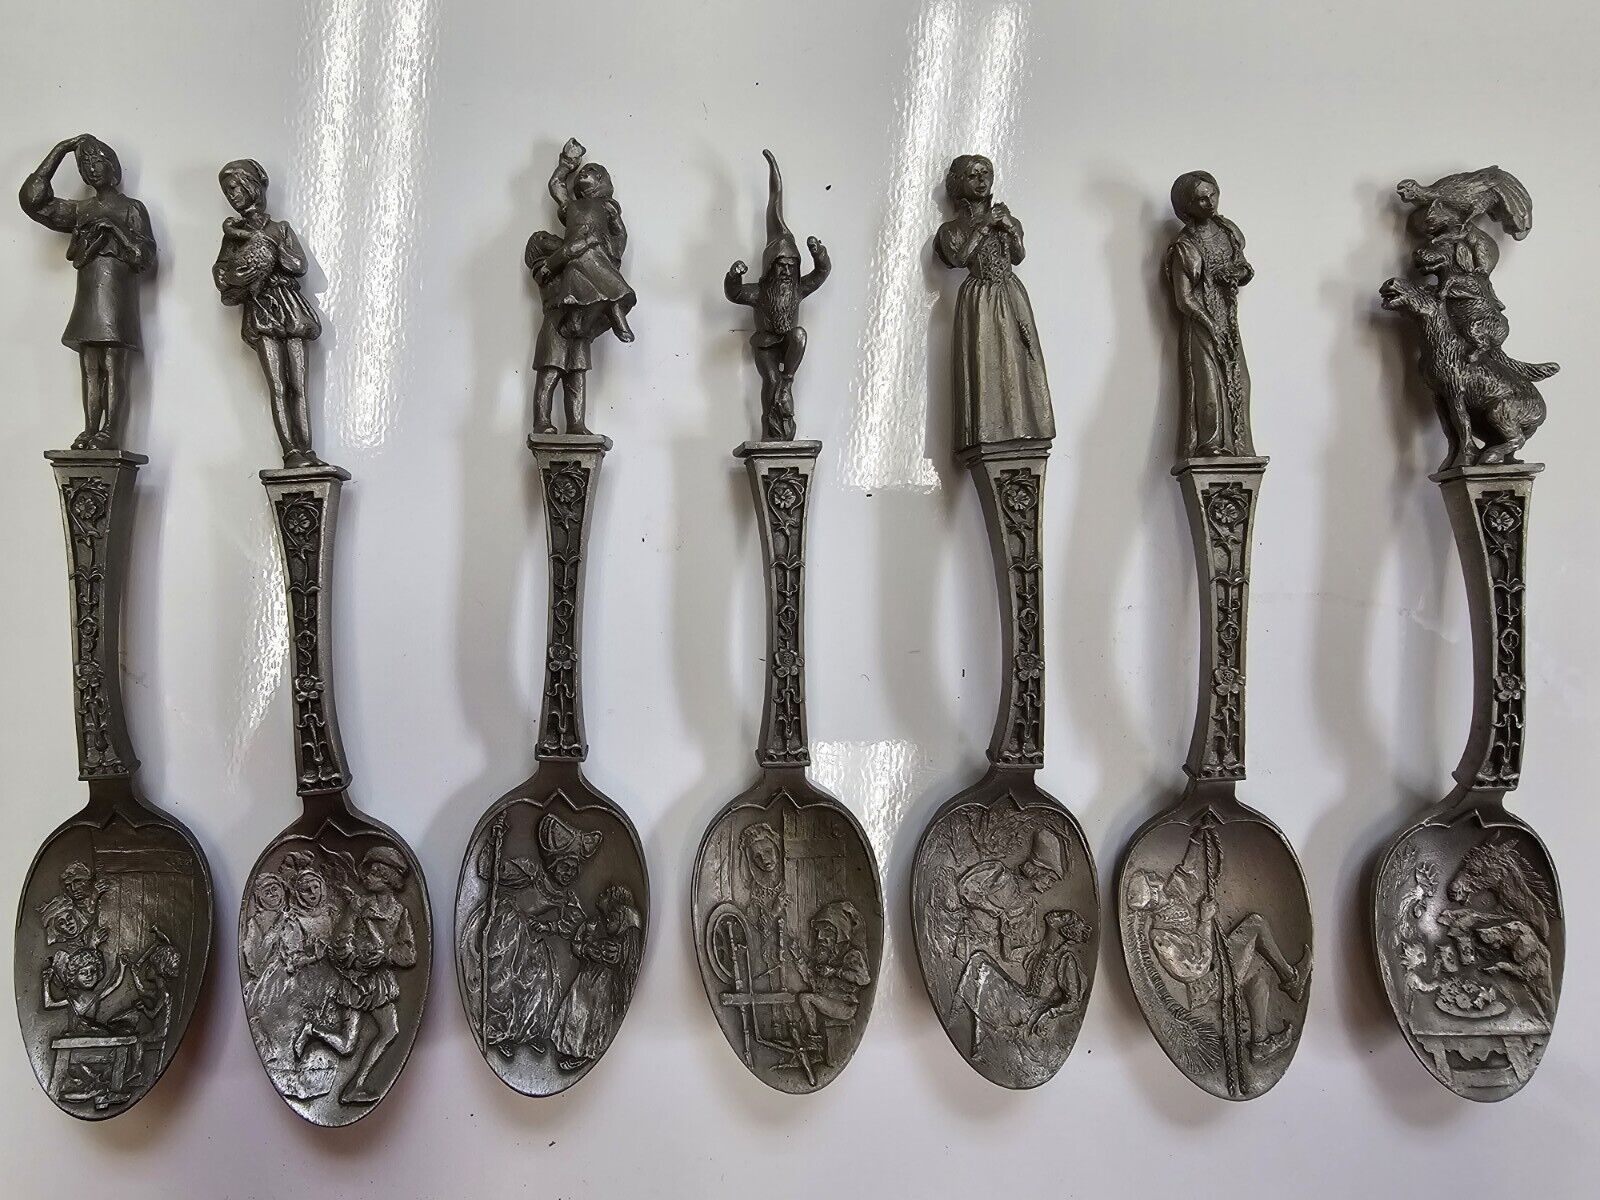 1979 Franklin Mint Disney Brothers Grimm Pewter Fairy Tale Spoon SET OF 7